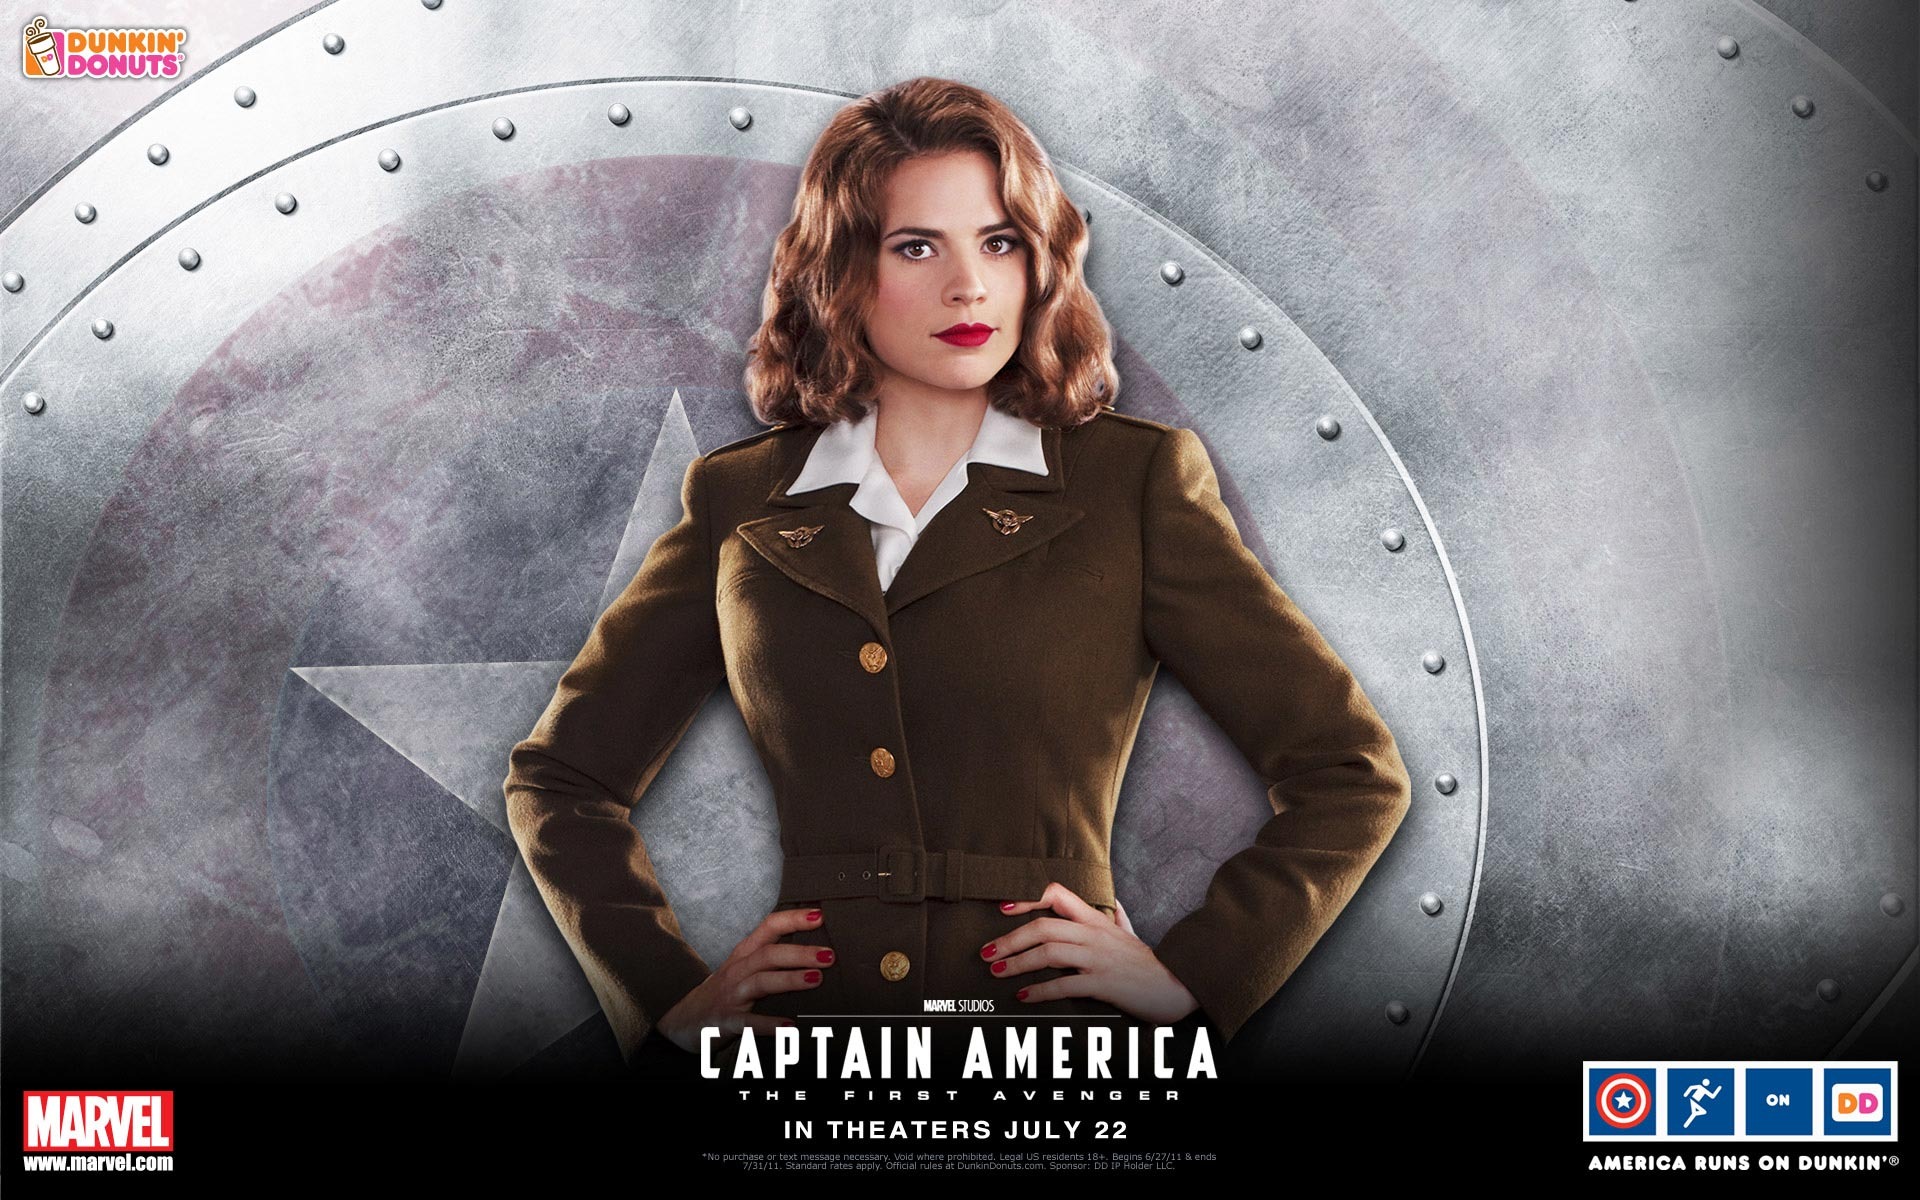 Captain America: The First Avenger wallpapers HD #8 - 1920x1200